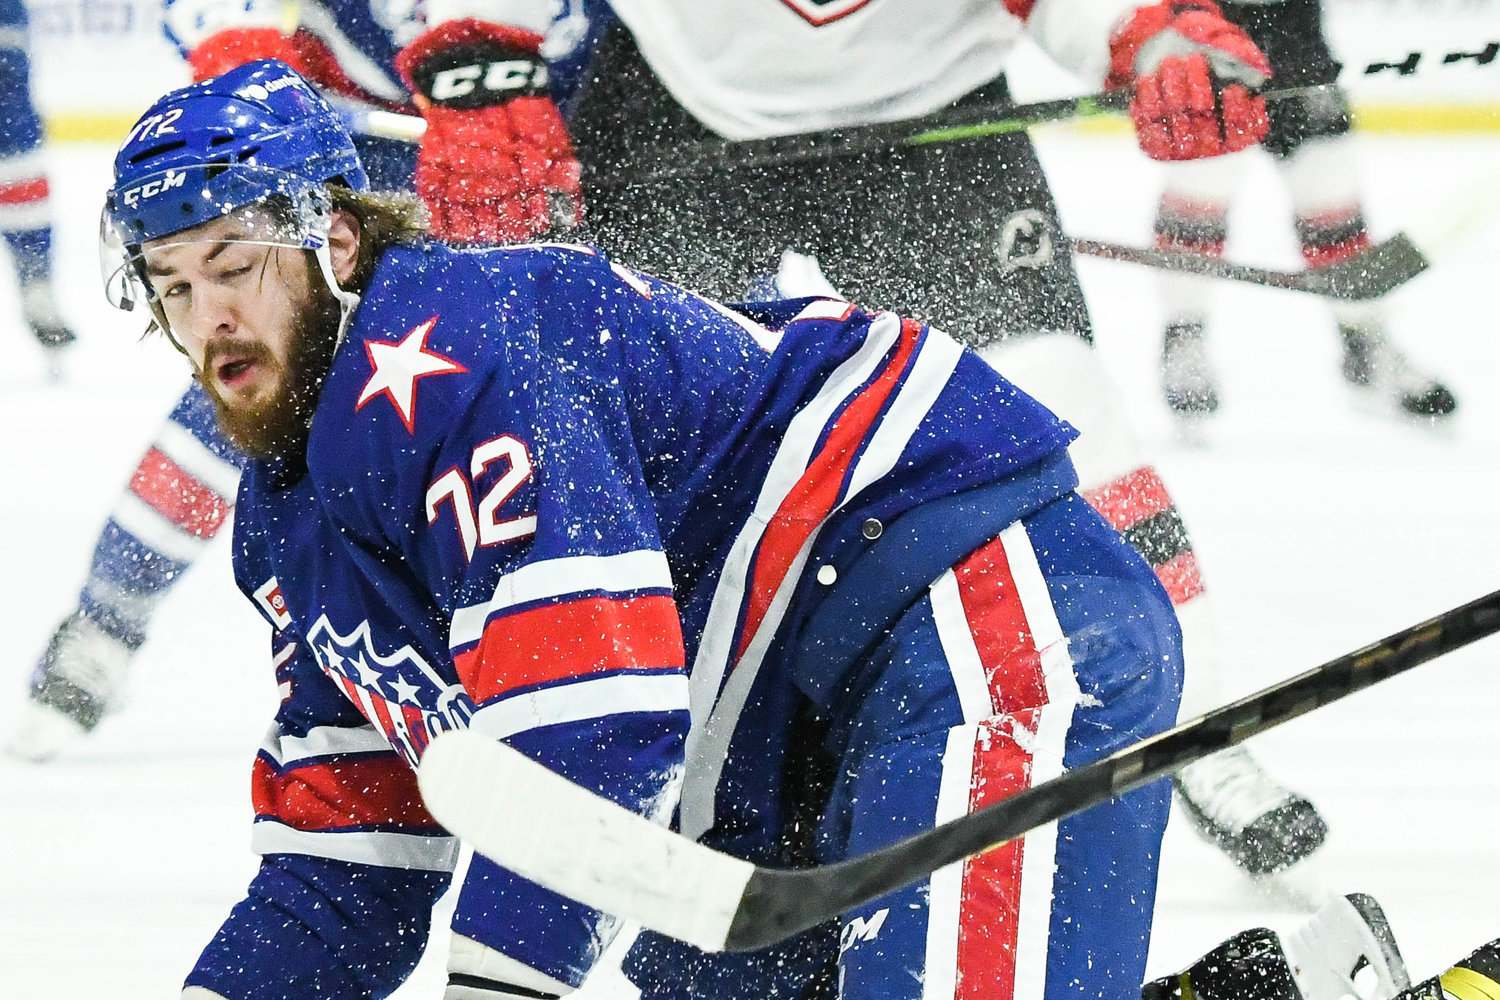 Rochester Americans player Ryan MacInnis is sprayed with snow on the ice during the AHL North Division semifinal round game against Utica on Tuesday night.